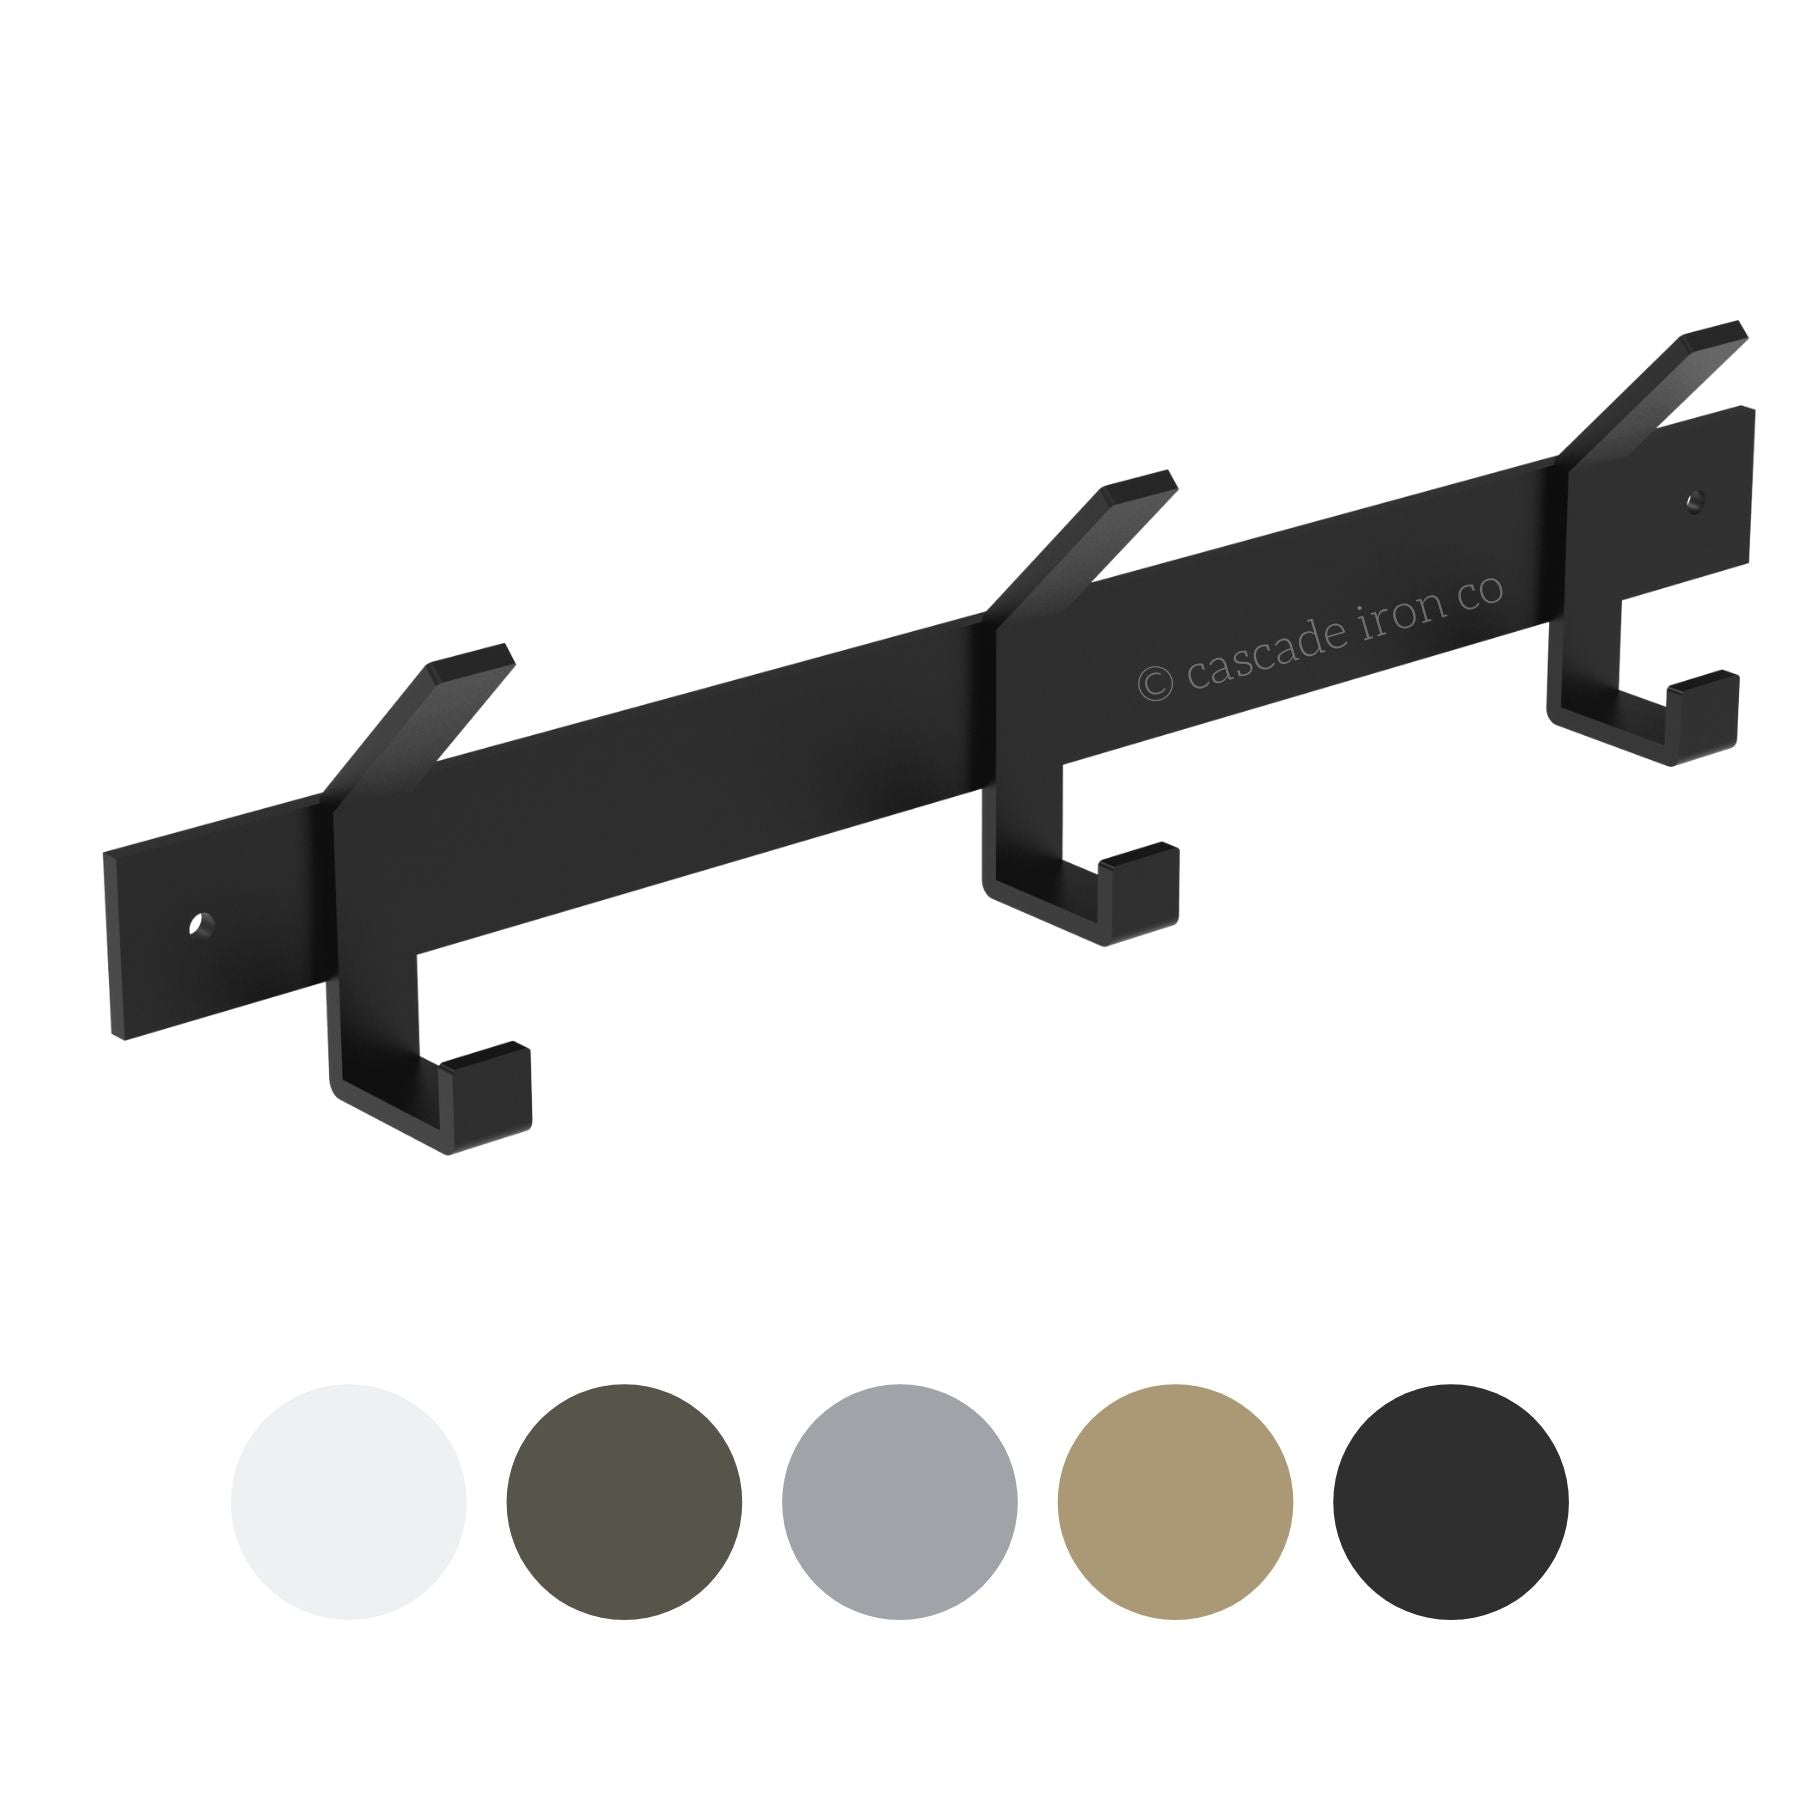 Wall Mounted Coat Rack with Double Hooks - Cascade Iron Co